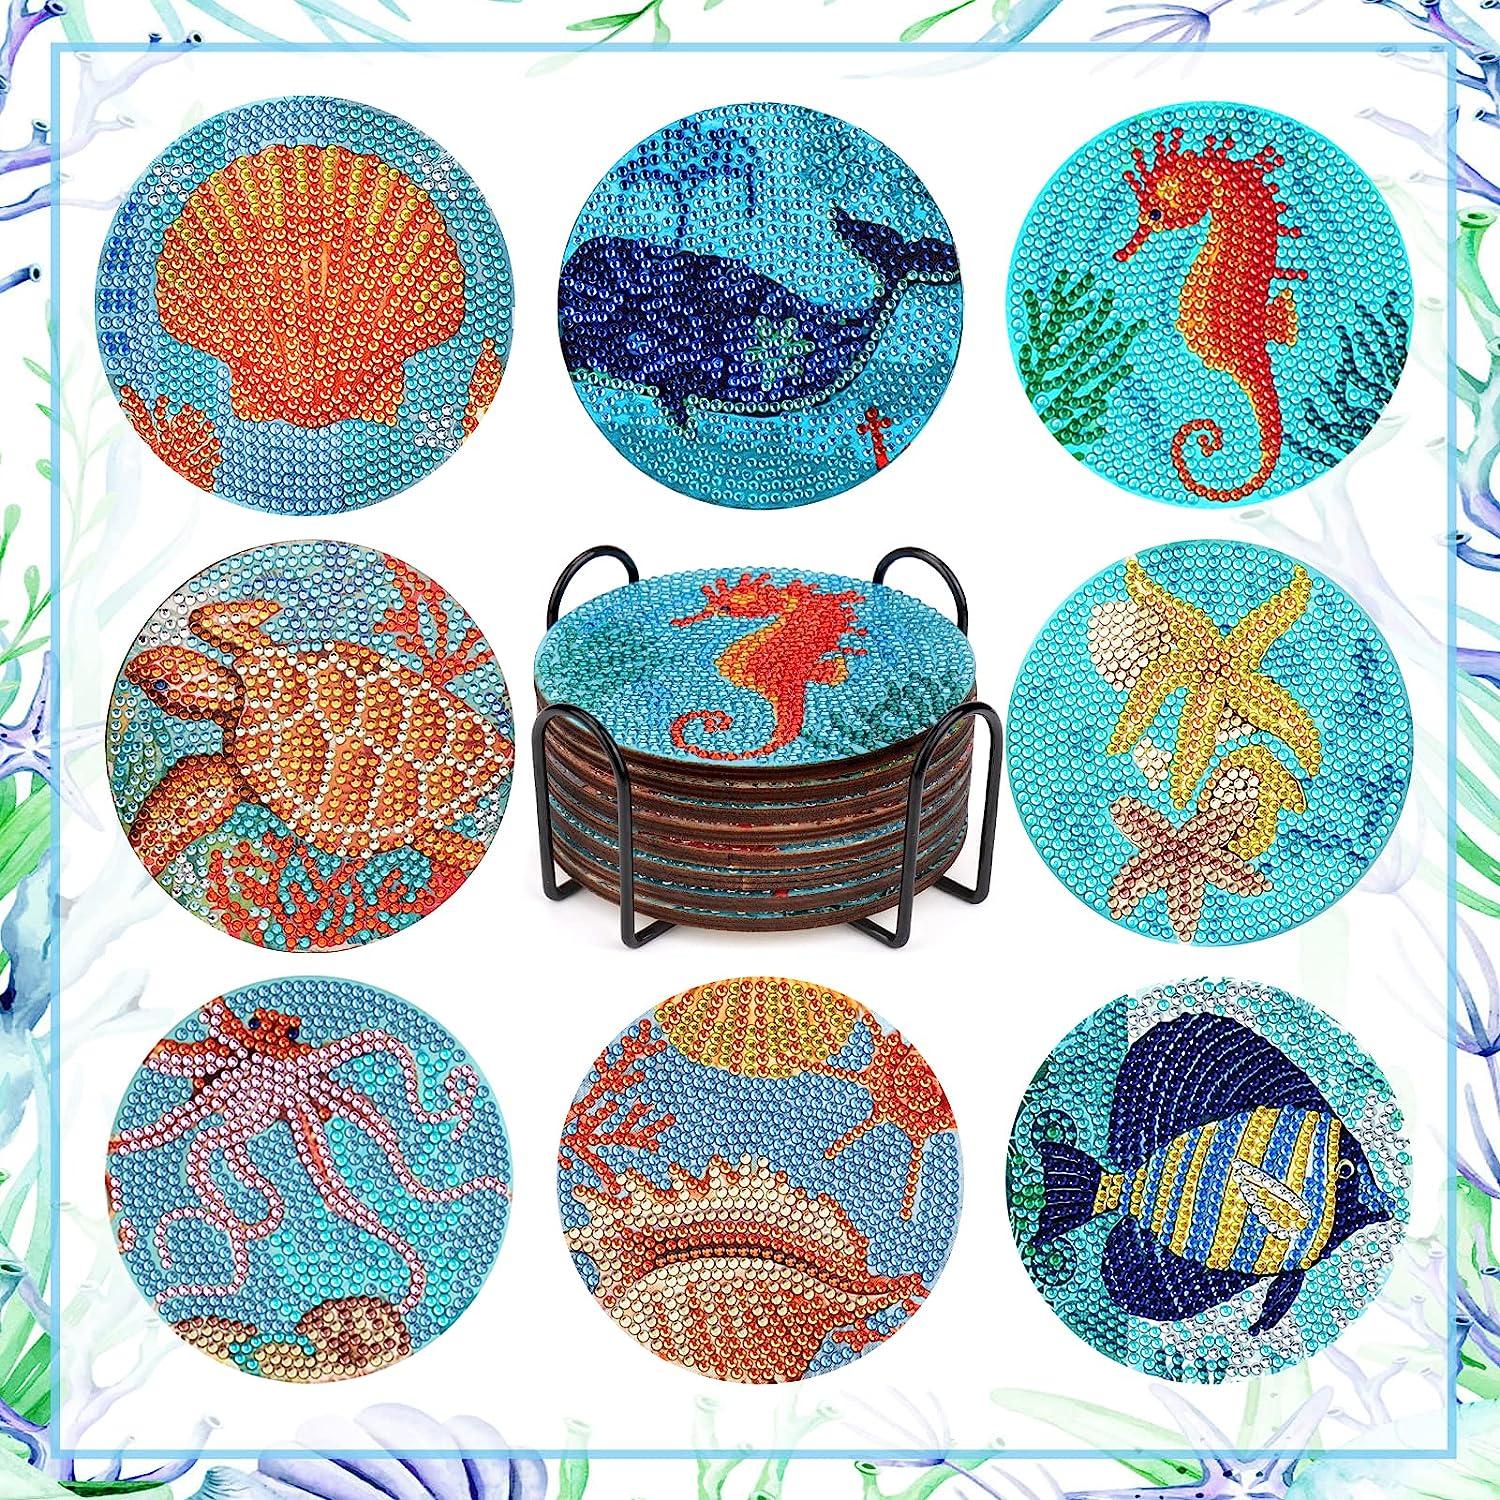 8 Pieces Diamond Painting Coasters Kit with Holder,DIY Beach Theme Ocean  Life Diamond Painting Coasters,Diamond Art Craft for Beginners Adults &  Kids Housewarming Gifts Home Kitchen Table Decor